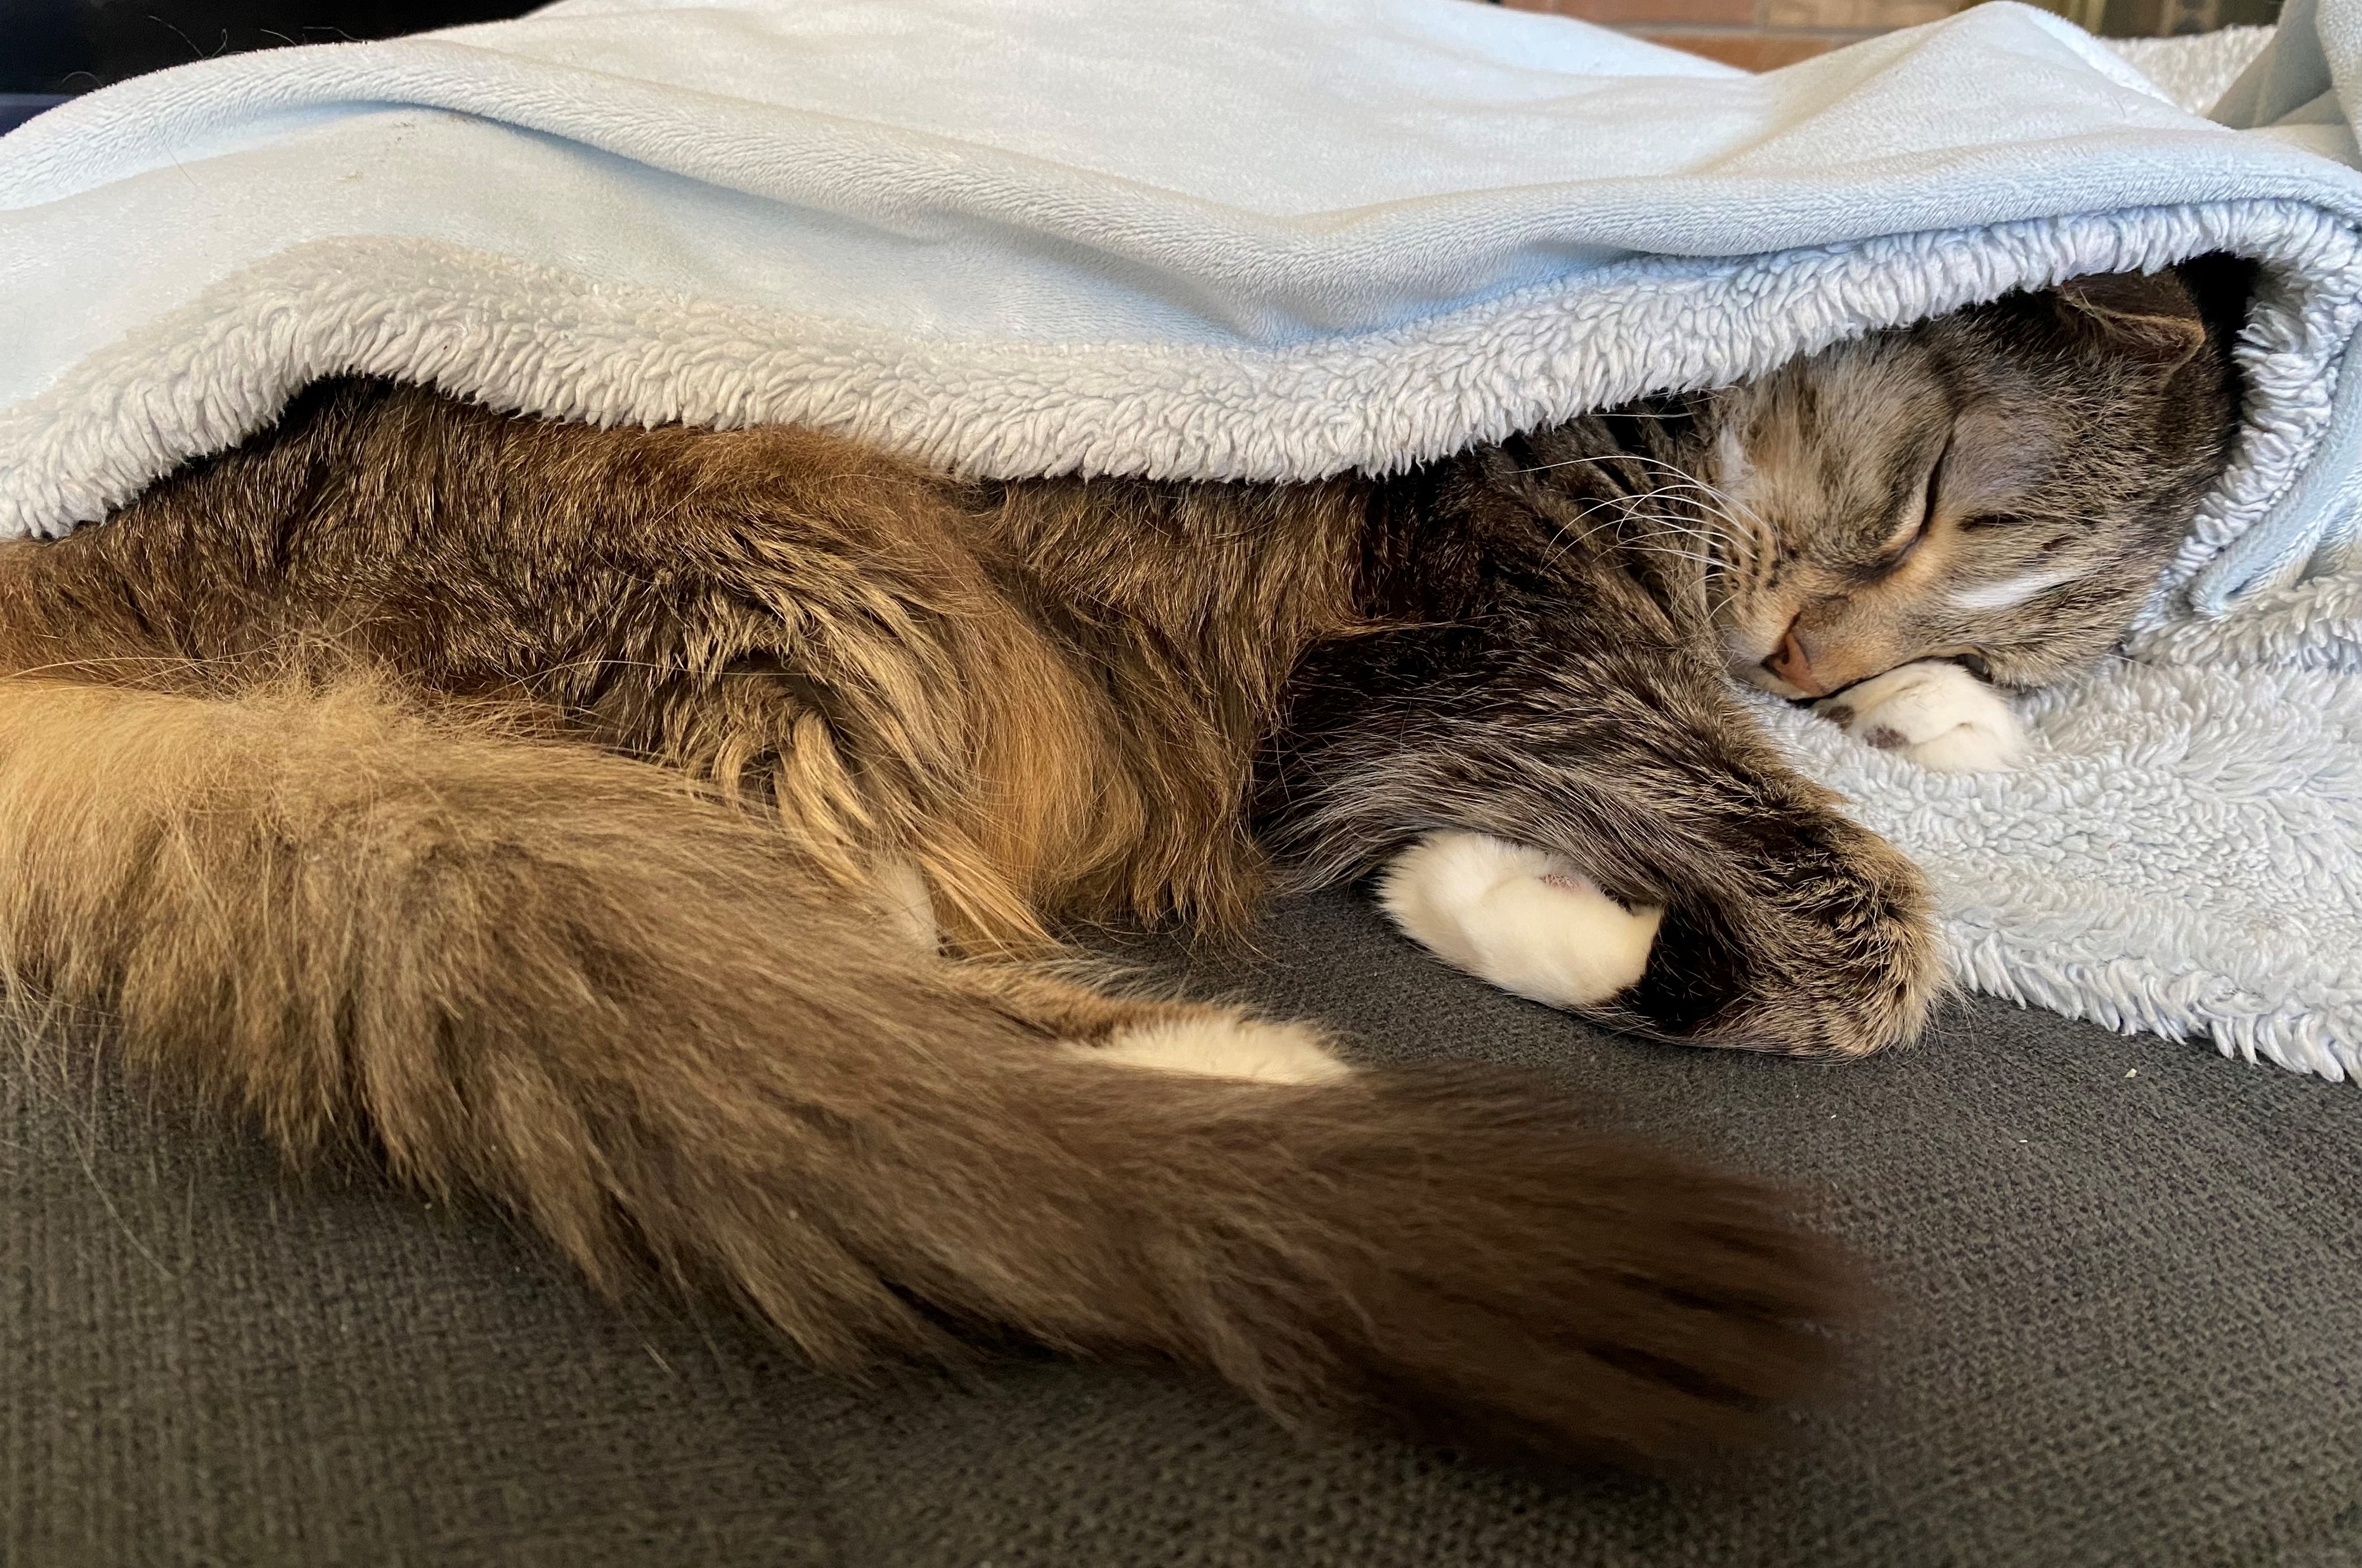 Photo of gray cat named Lulu. She has a fluffy tail and is laying on a gray sofa, curled up and sleeping under a light blue fleecy blanket.